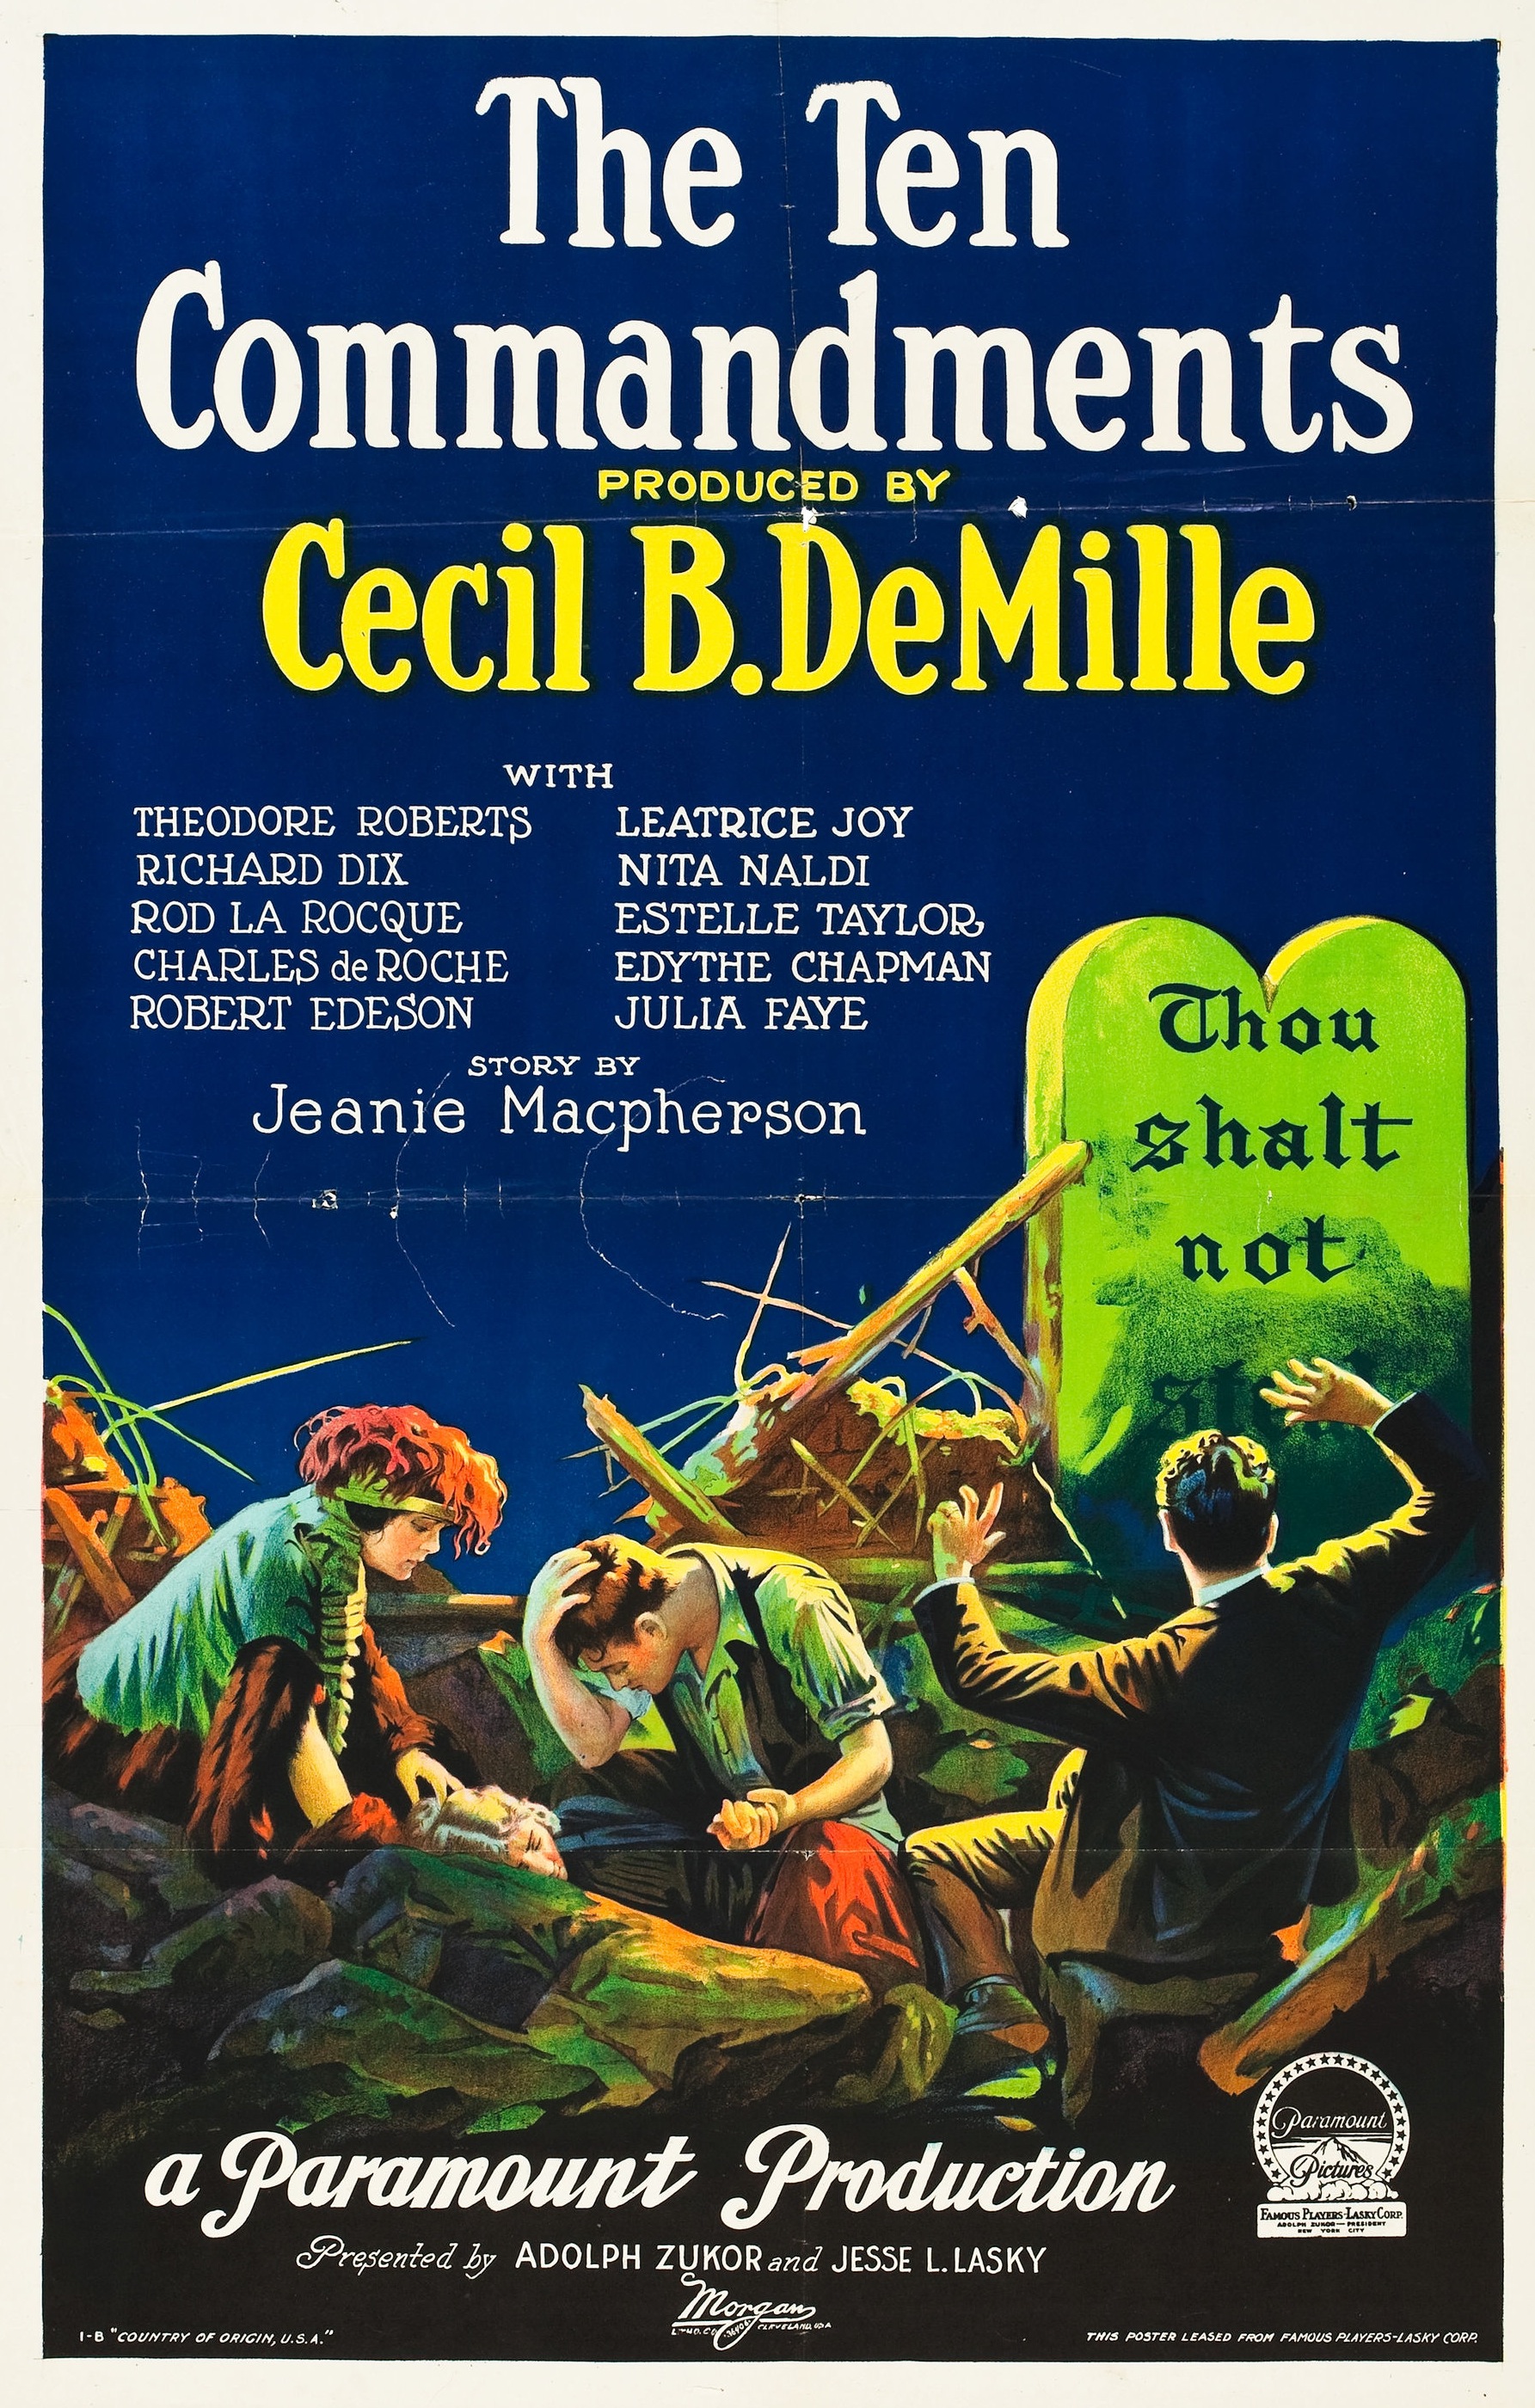 Image result for cecil b demille's 1923 movie the ten commandments